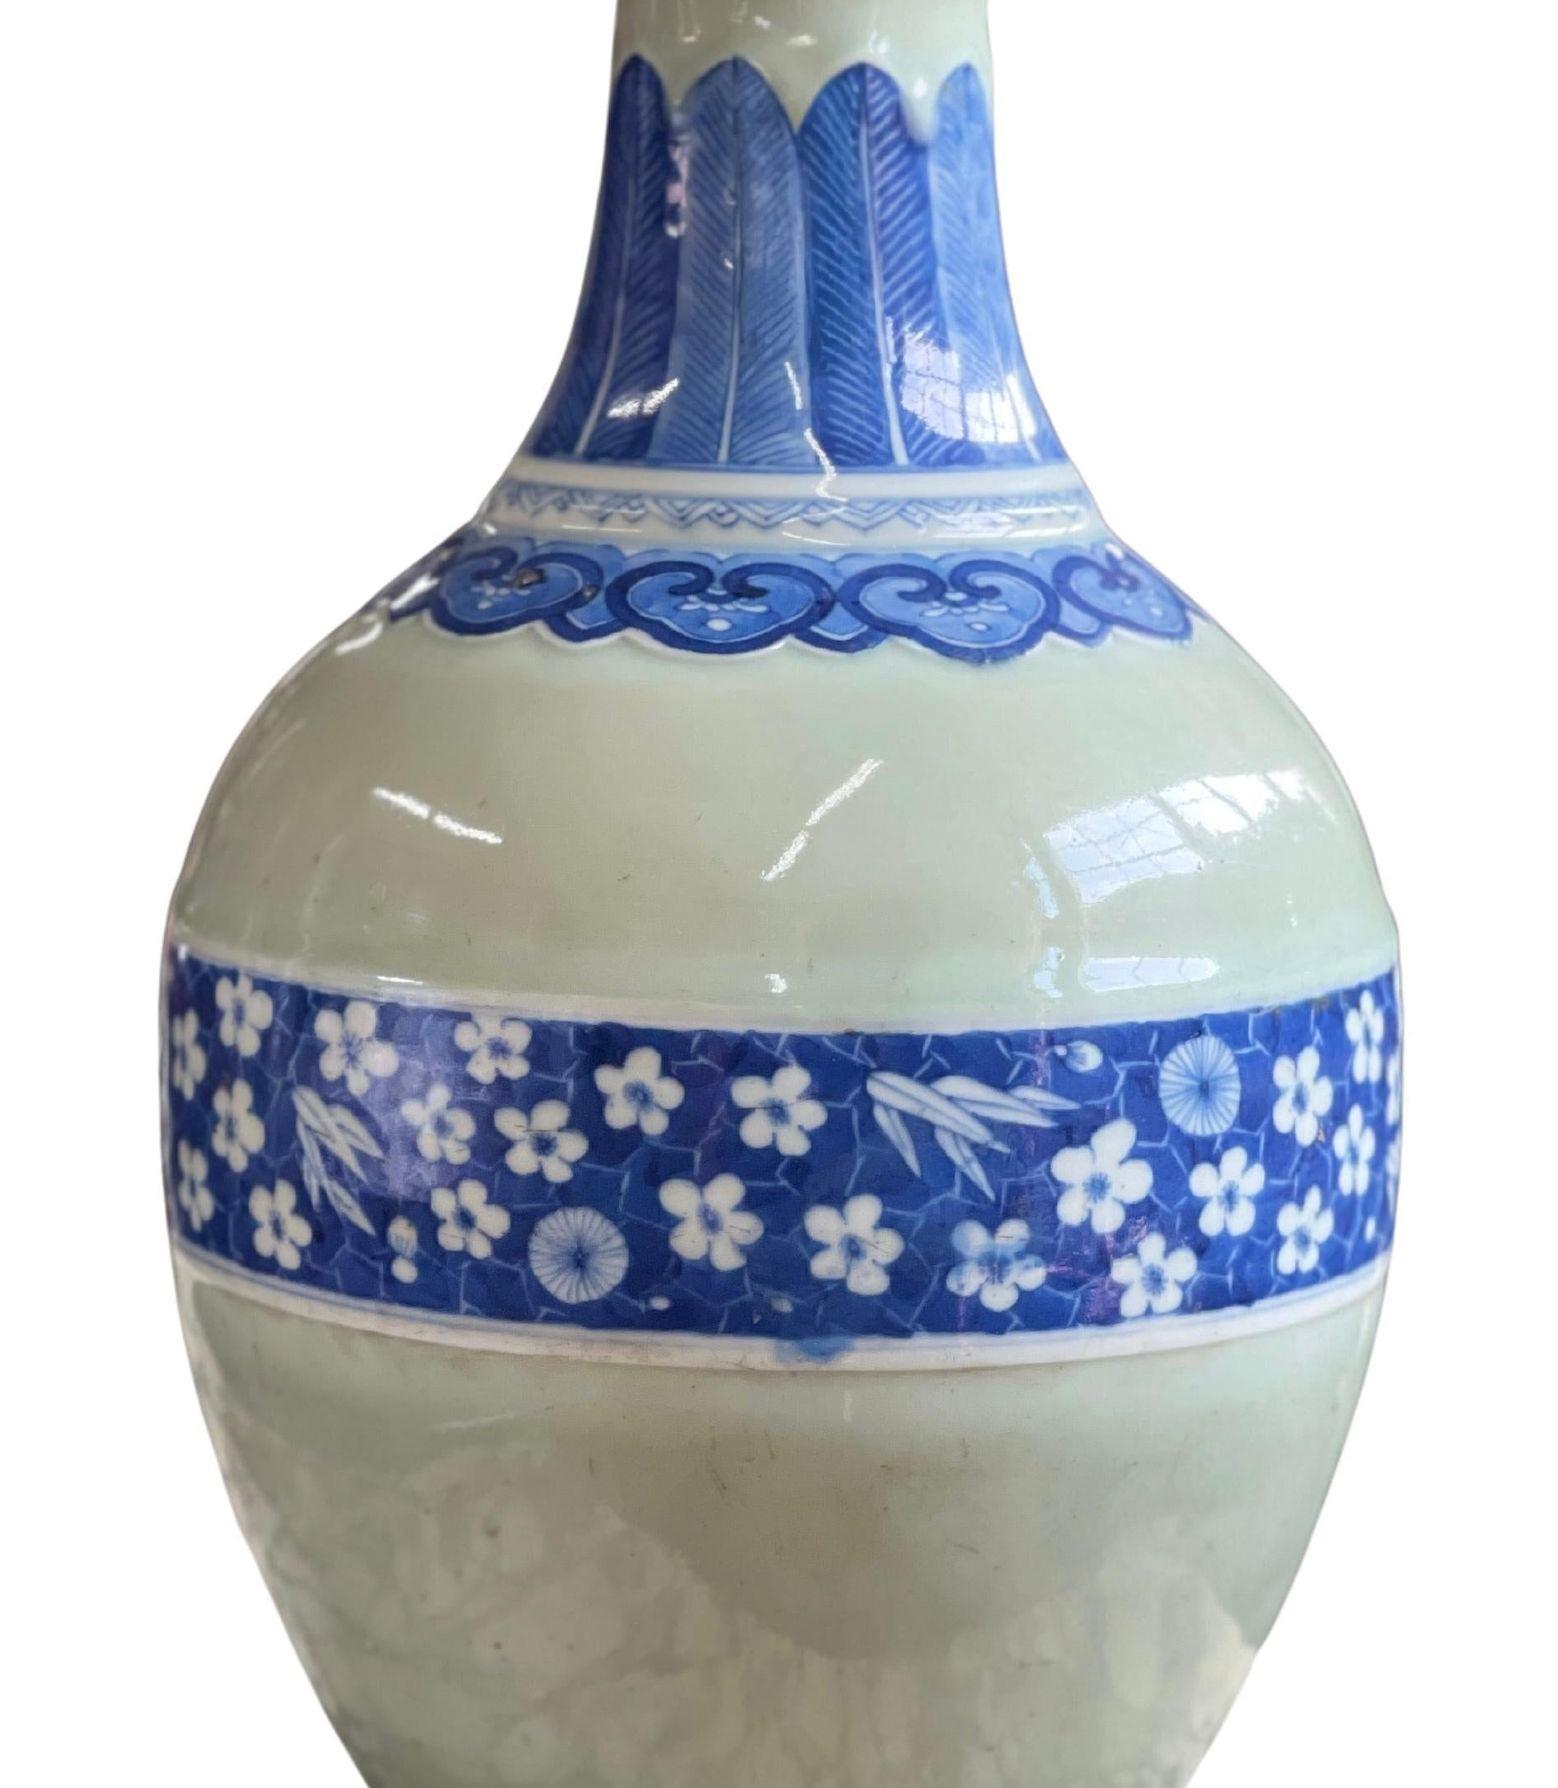 Traditional Chinese porcelain blue and white vase decorated with flowers and botanical illustrations (18th Century).